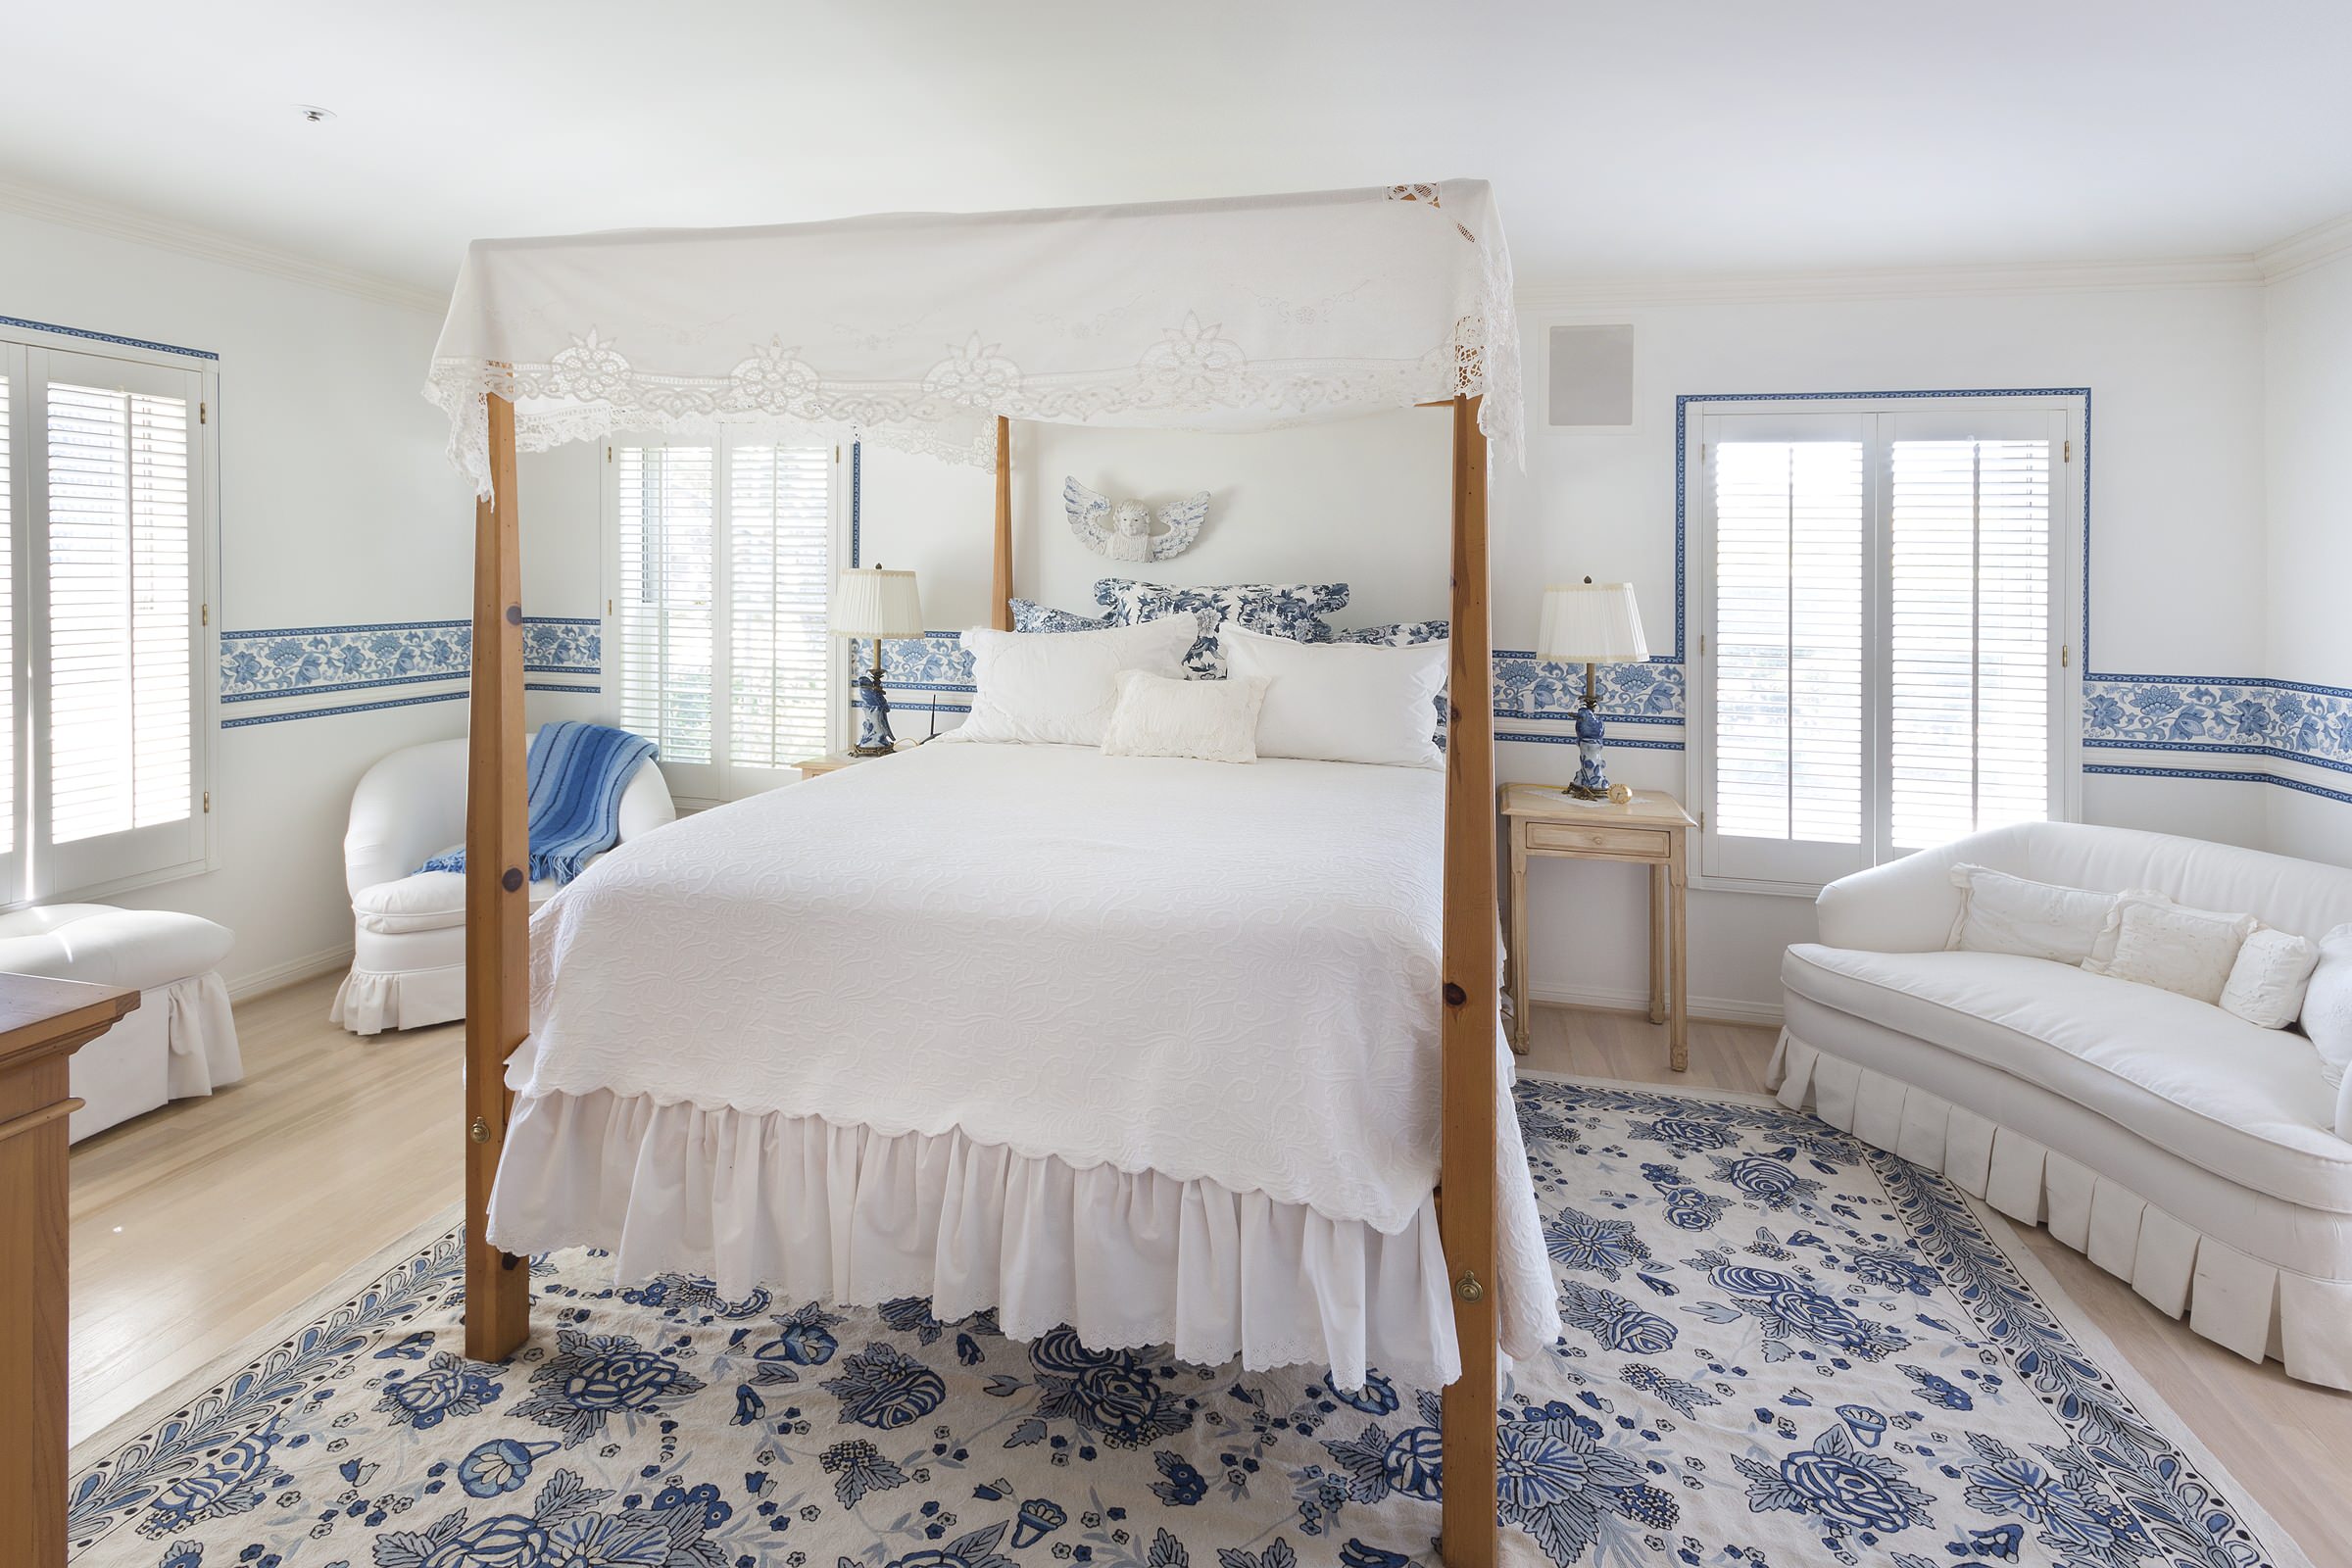 blue and white bedroom decor